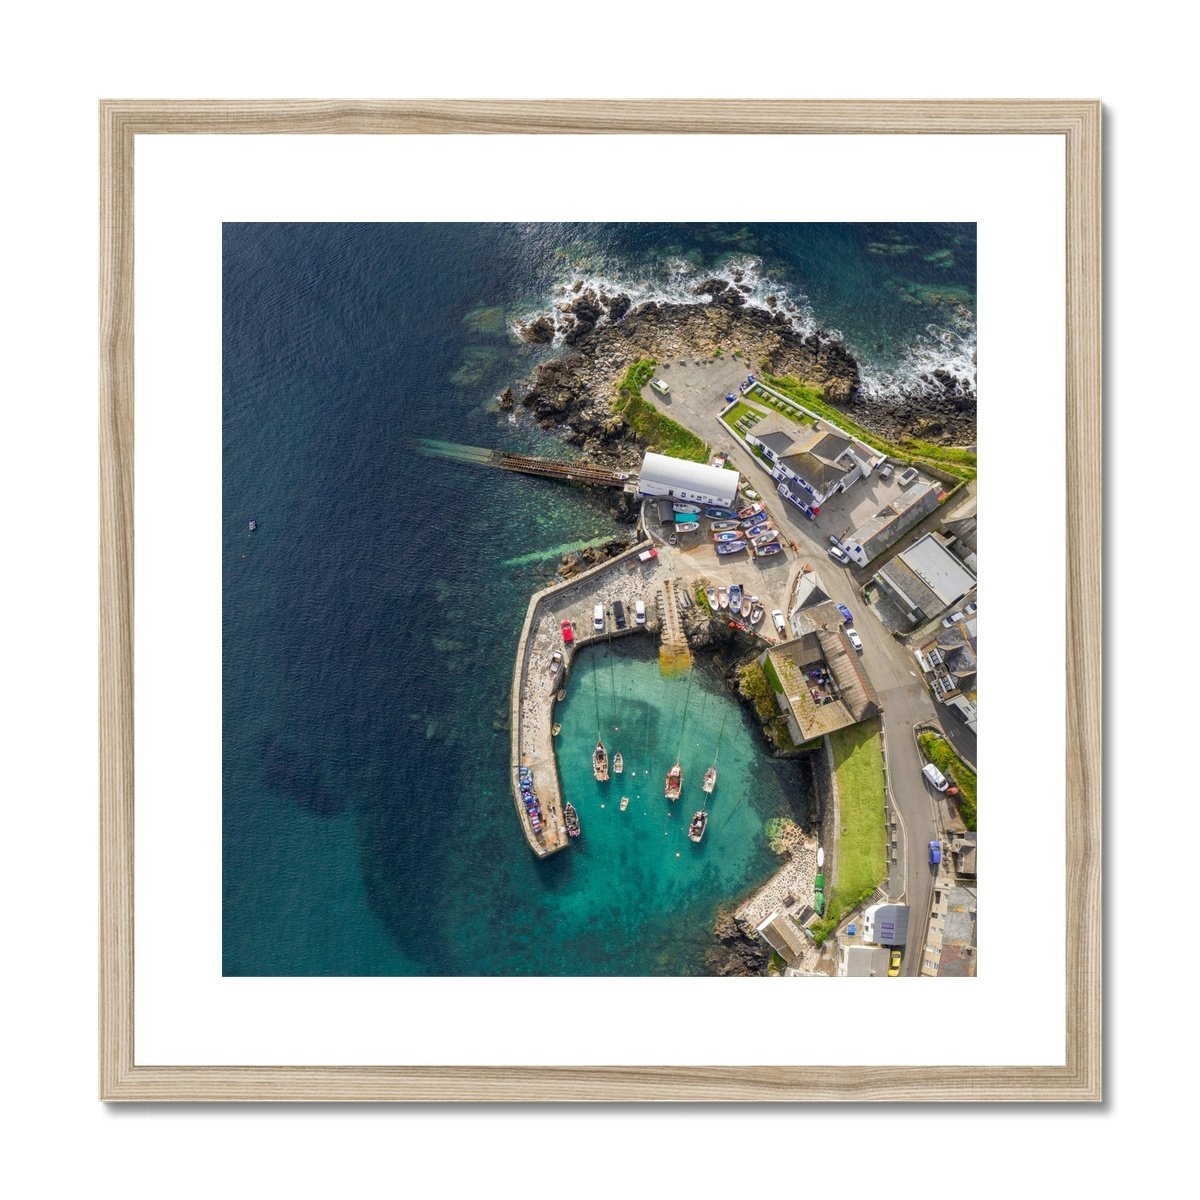 coverack from above wooden frame